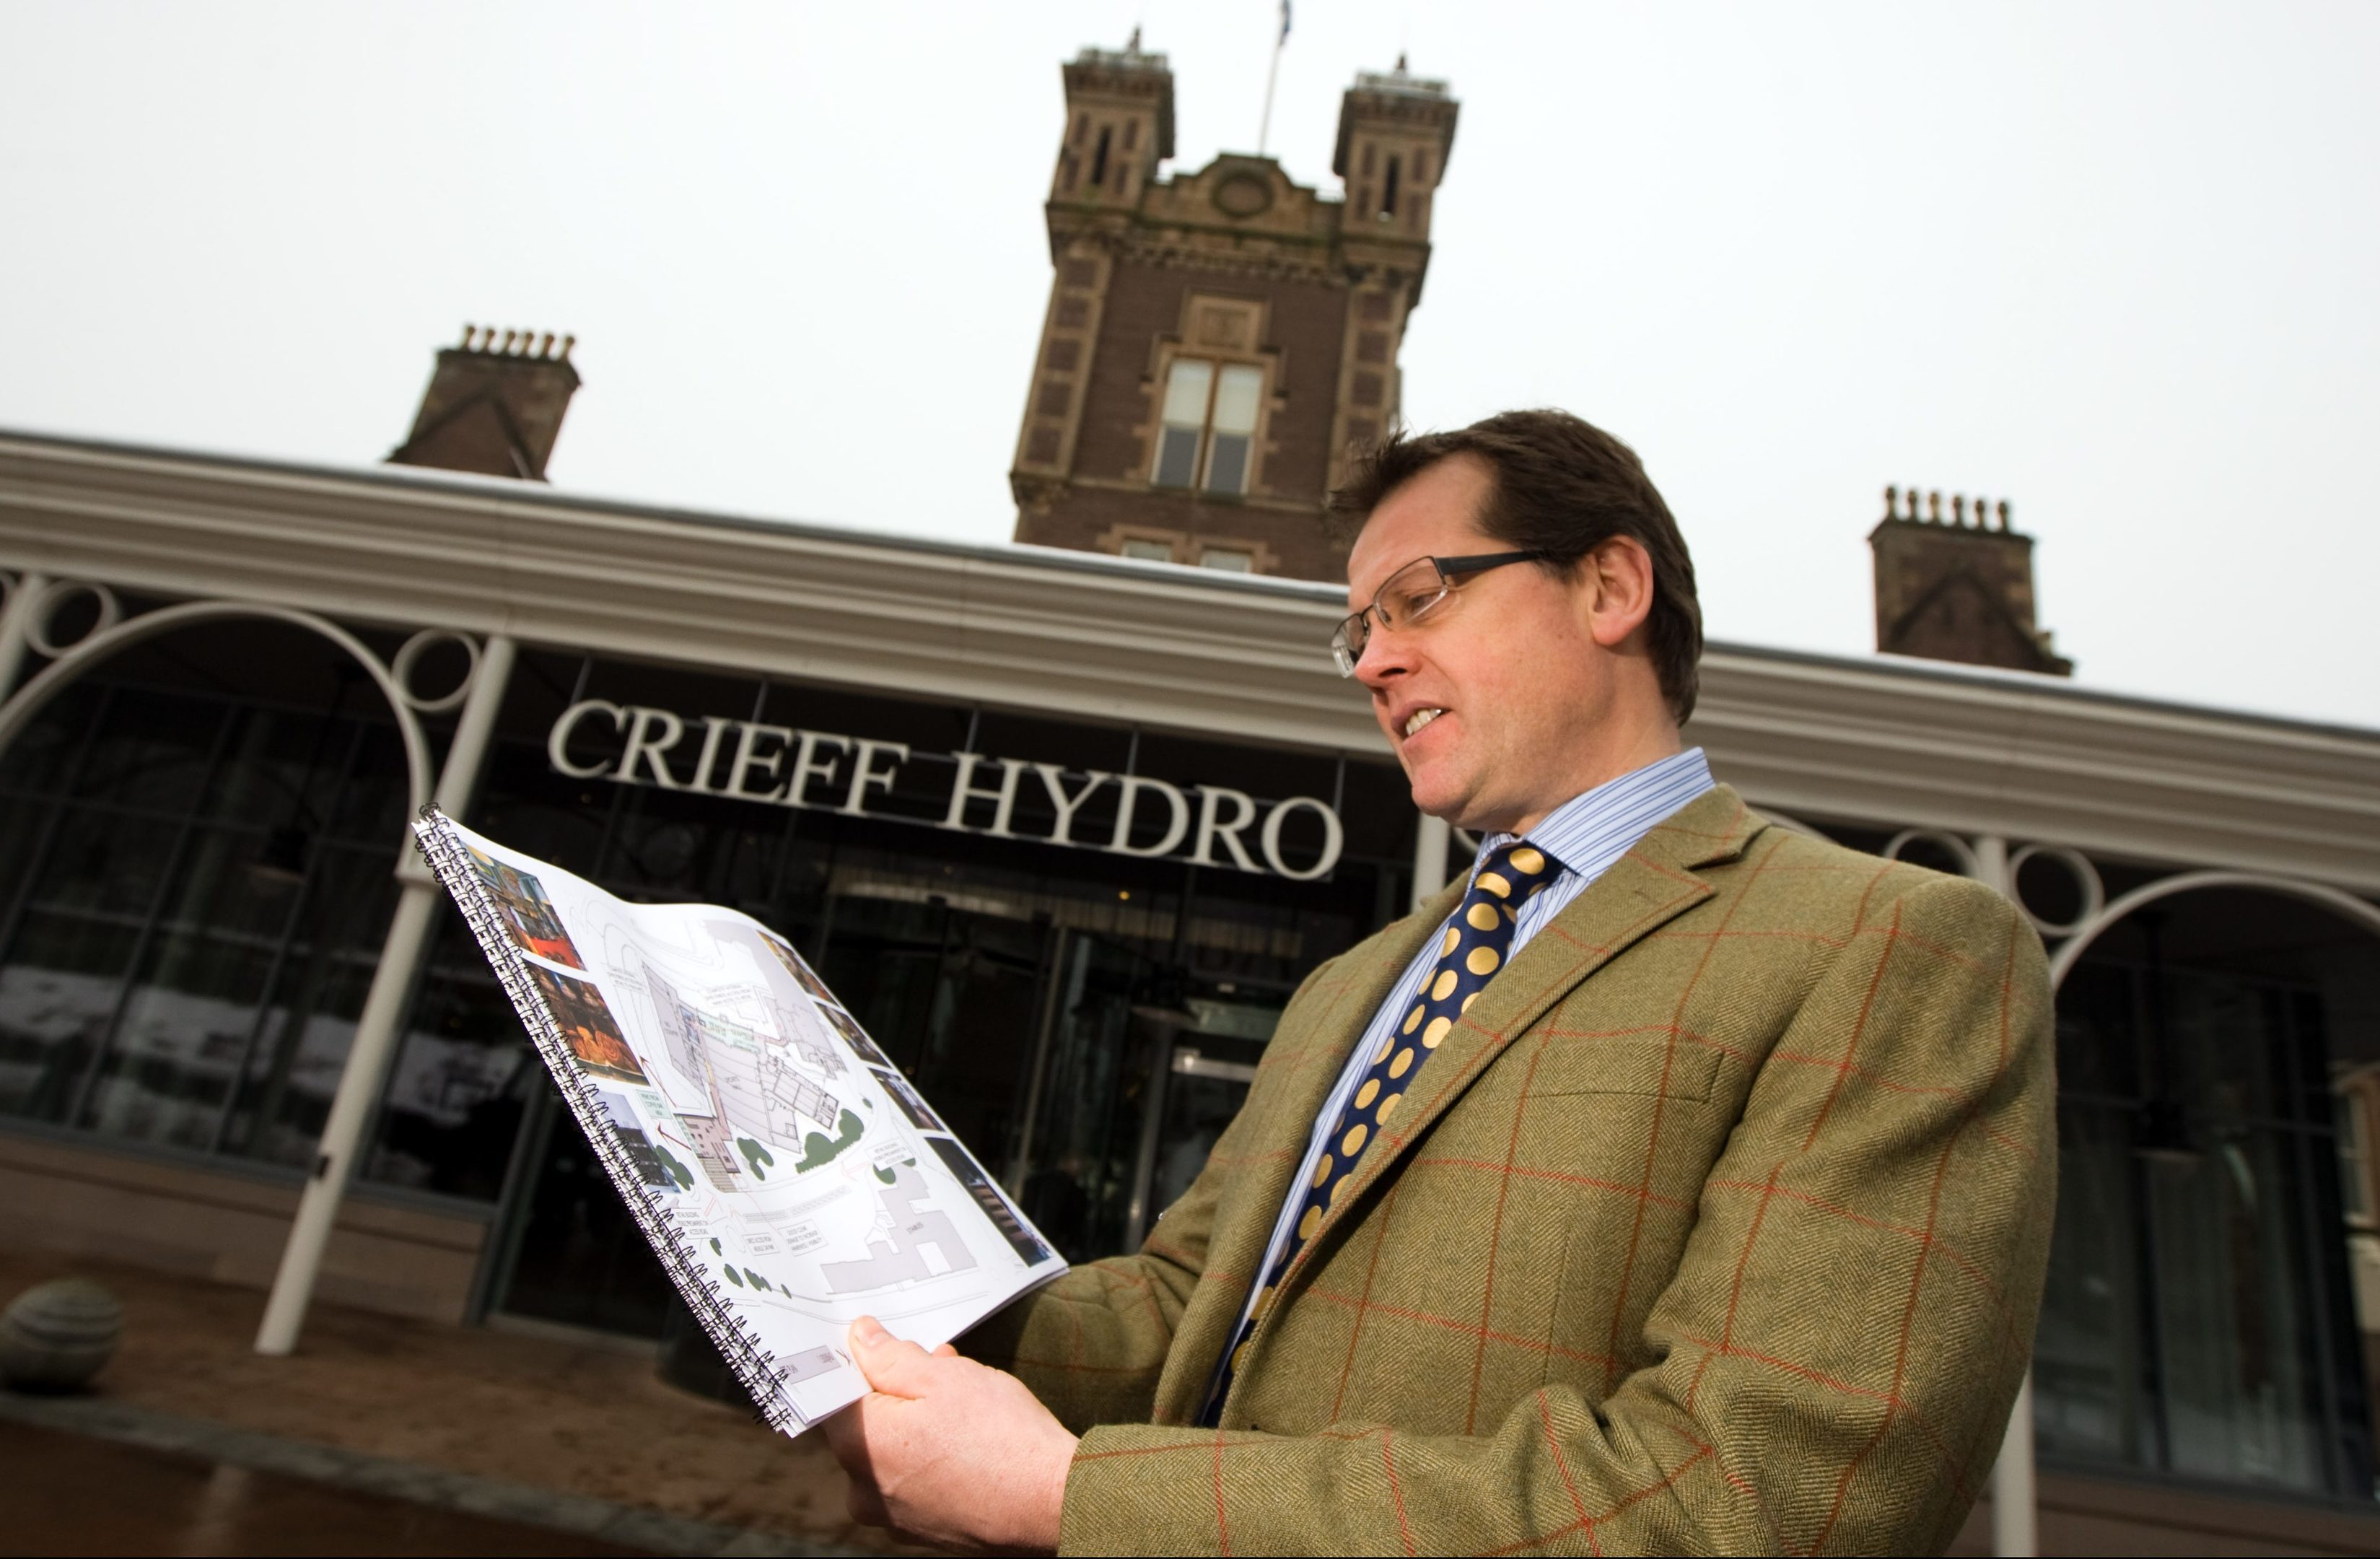 Stephen Leckie with the Crieff Hydro East development plans.